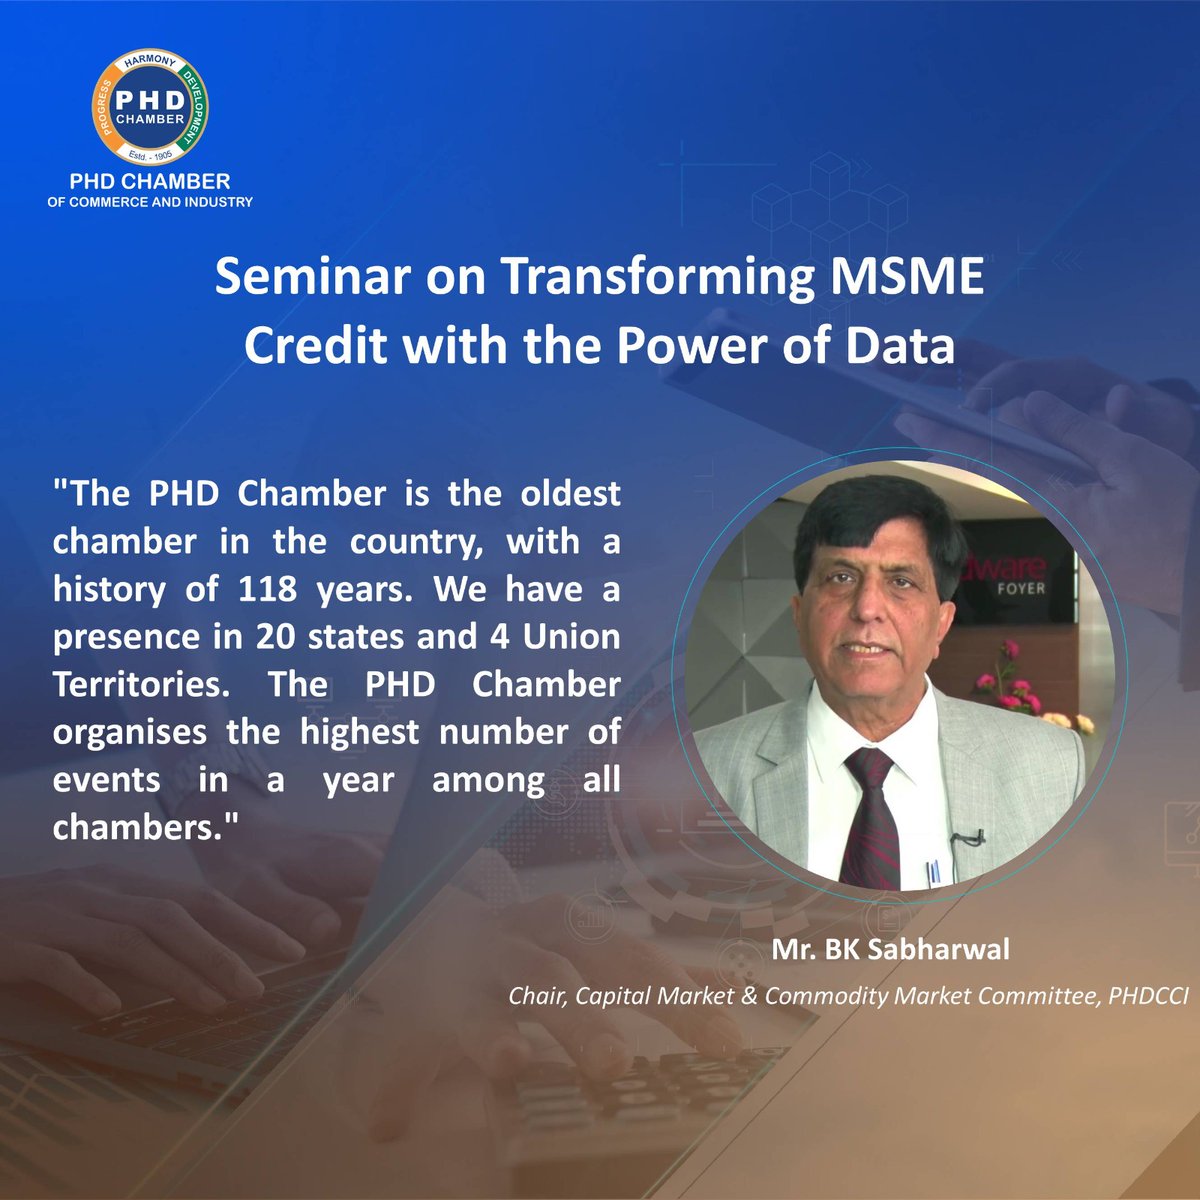 Mr.BK Sabharwal, Chair,Capital Market & Commodity Market Committee, PHDCCI, addressed the seminar on
Transforming MSME Credit with the Power of Data' held at the PHD House, New Delhi.

#PHDCCI #MSMECredit #PowerOfData #CapitalMarket #CommodityMarket

@narendramodi  @Saketdalmia